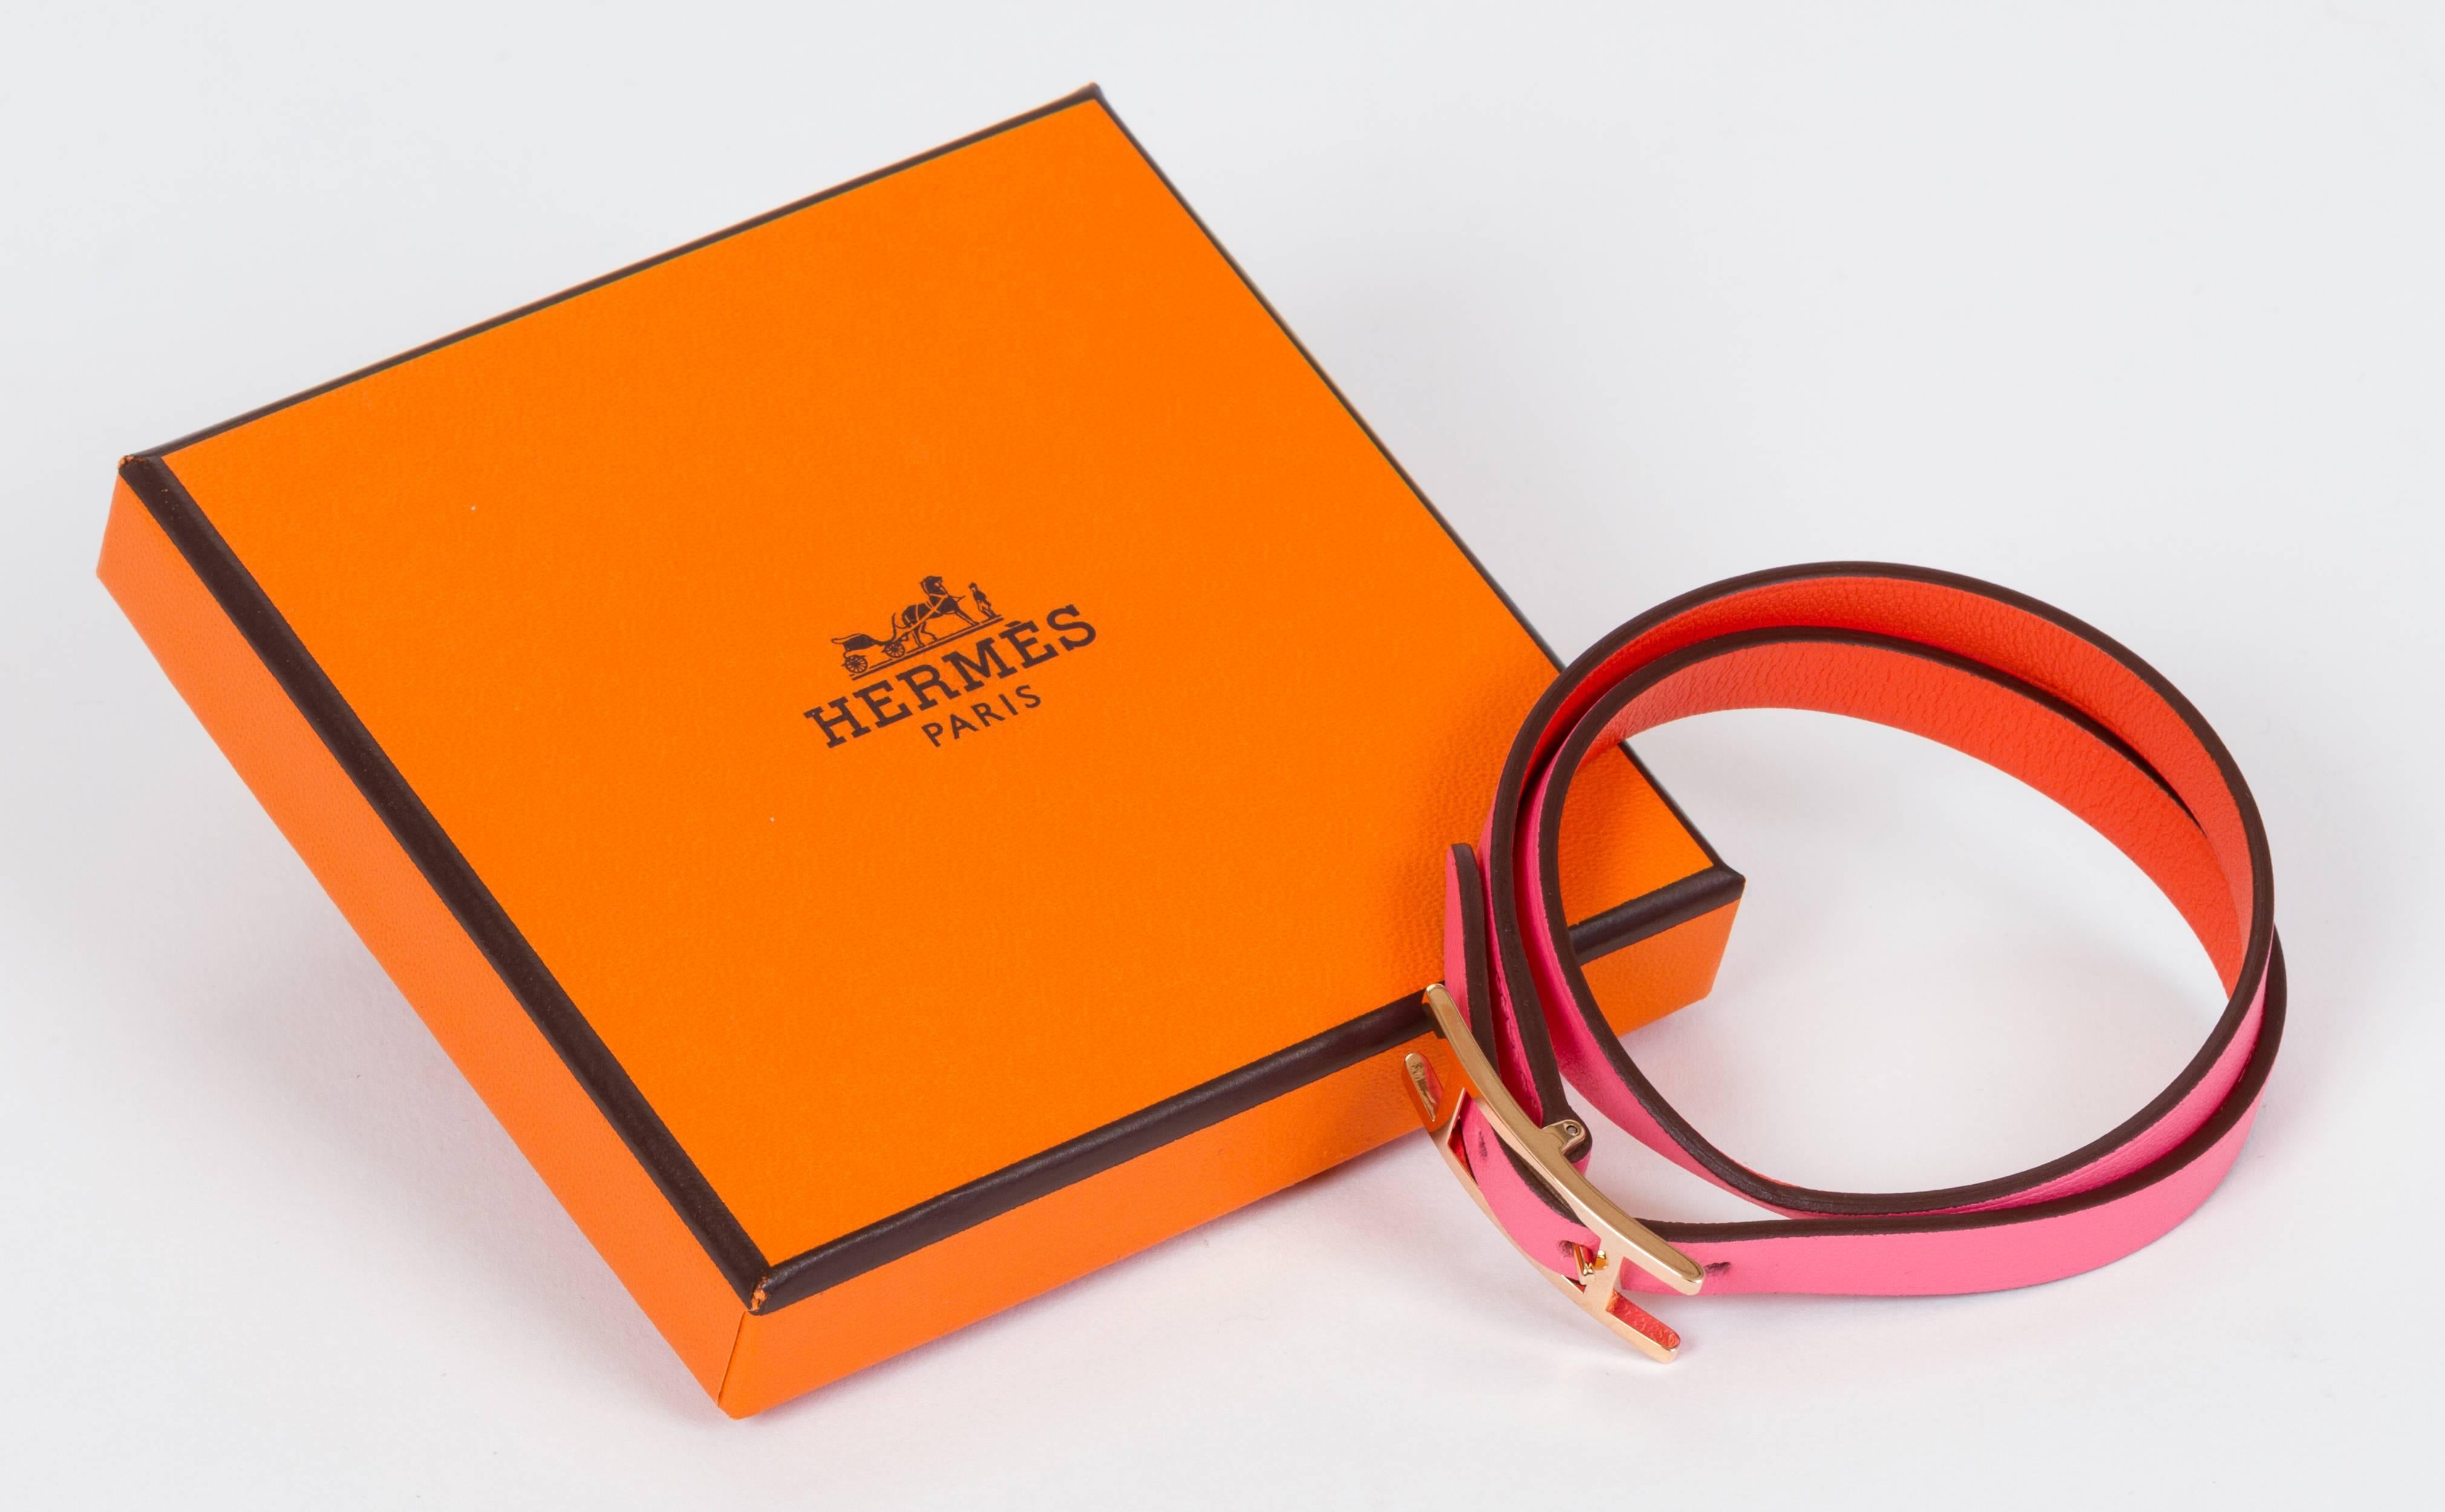 Hermès reversible rose azalee and orange poppy swift leather wrap bracelet. Rose gold buckle. Size M. Comes with original velvet pouch, box, ribbon, and gift bag.